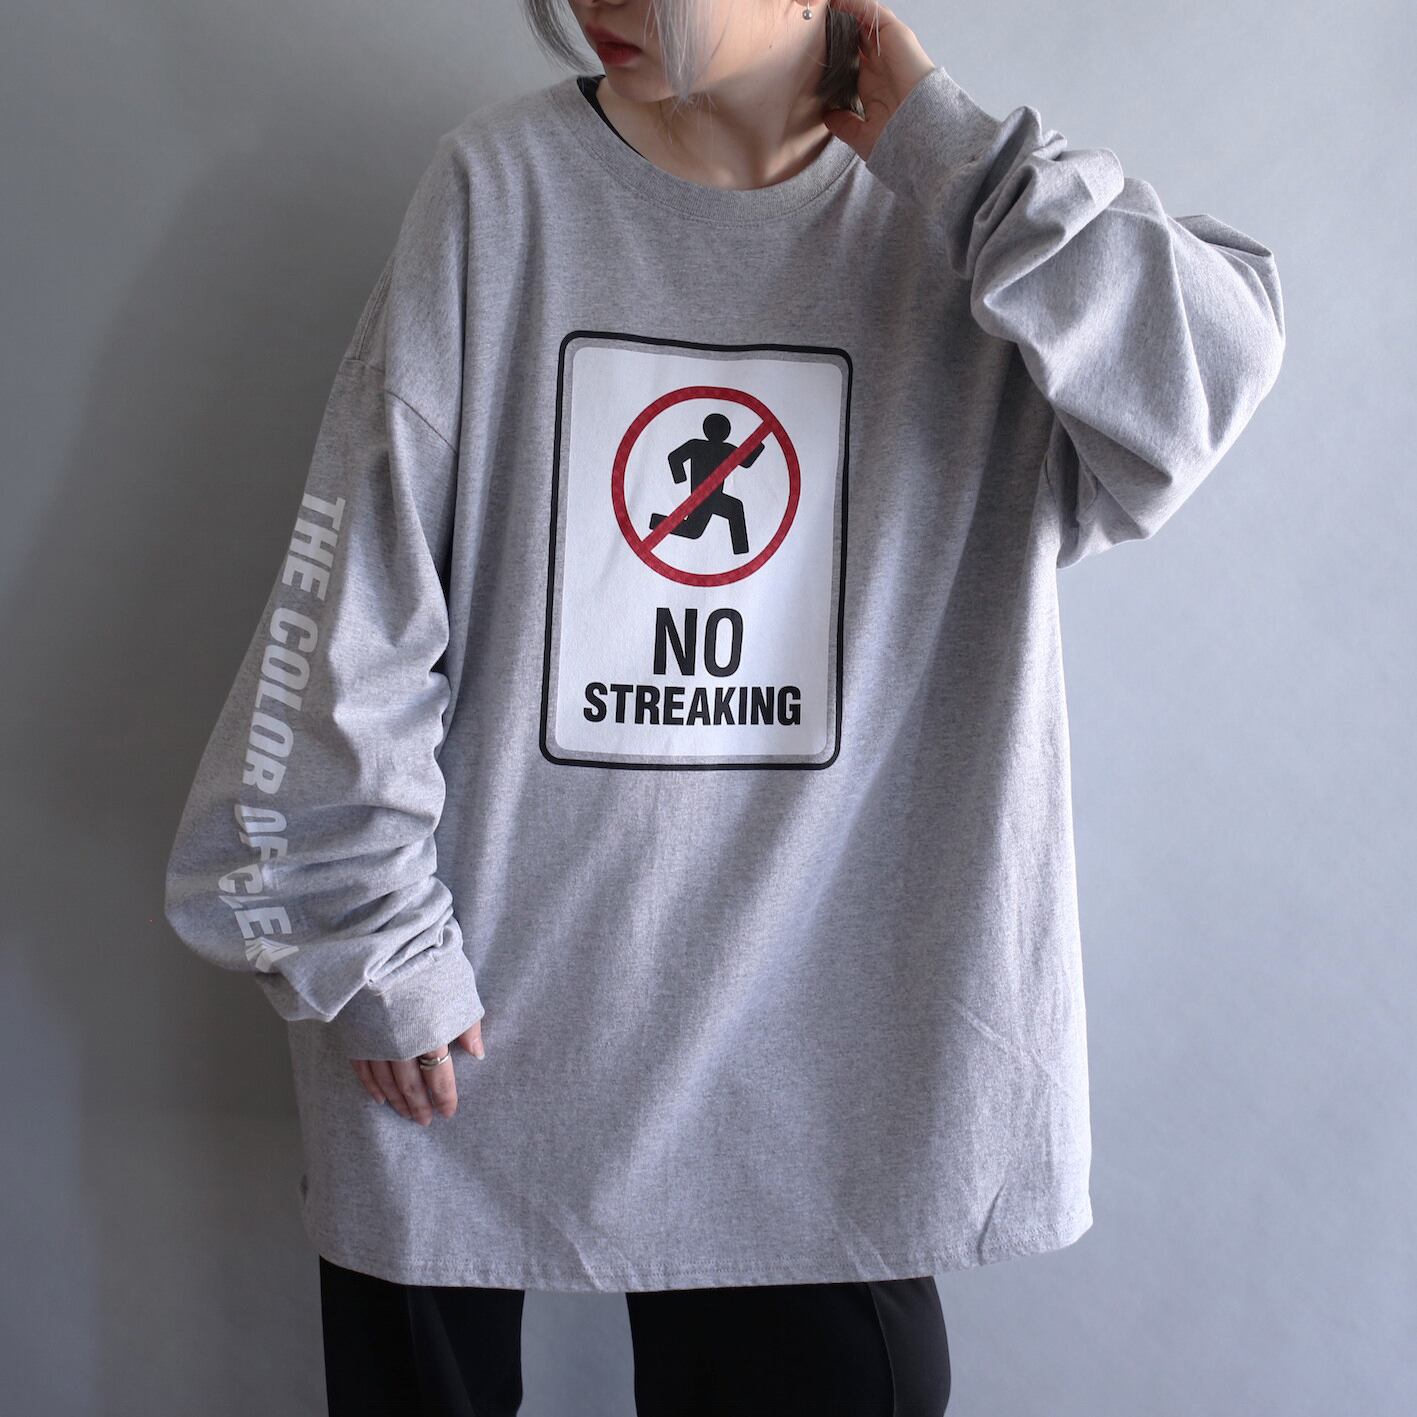 "NO STREAKING" front and back printed big l/s tee